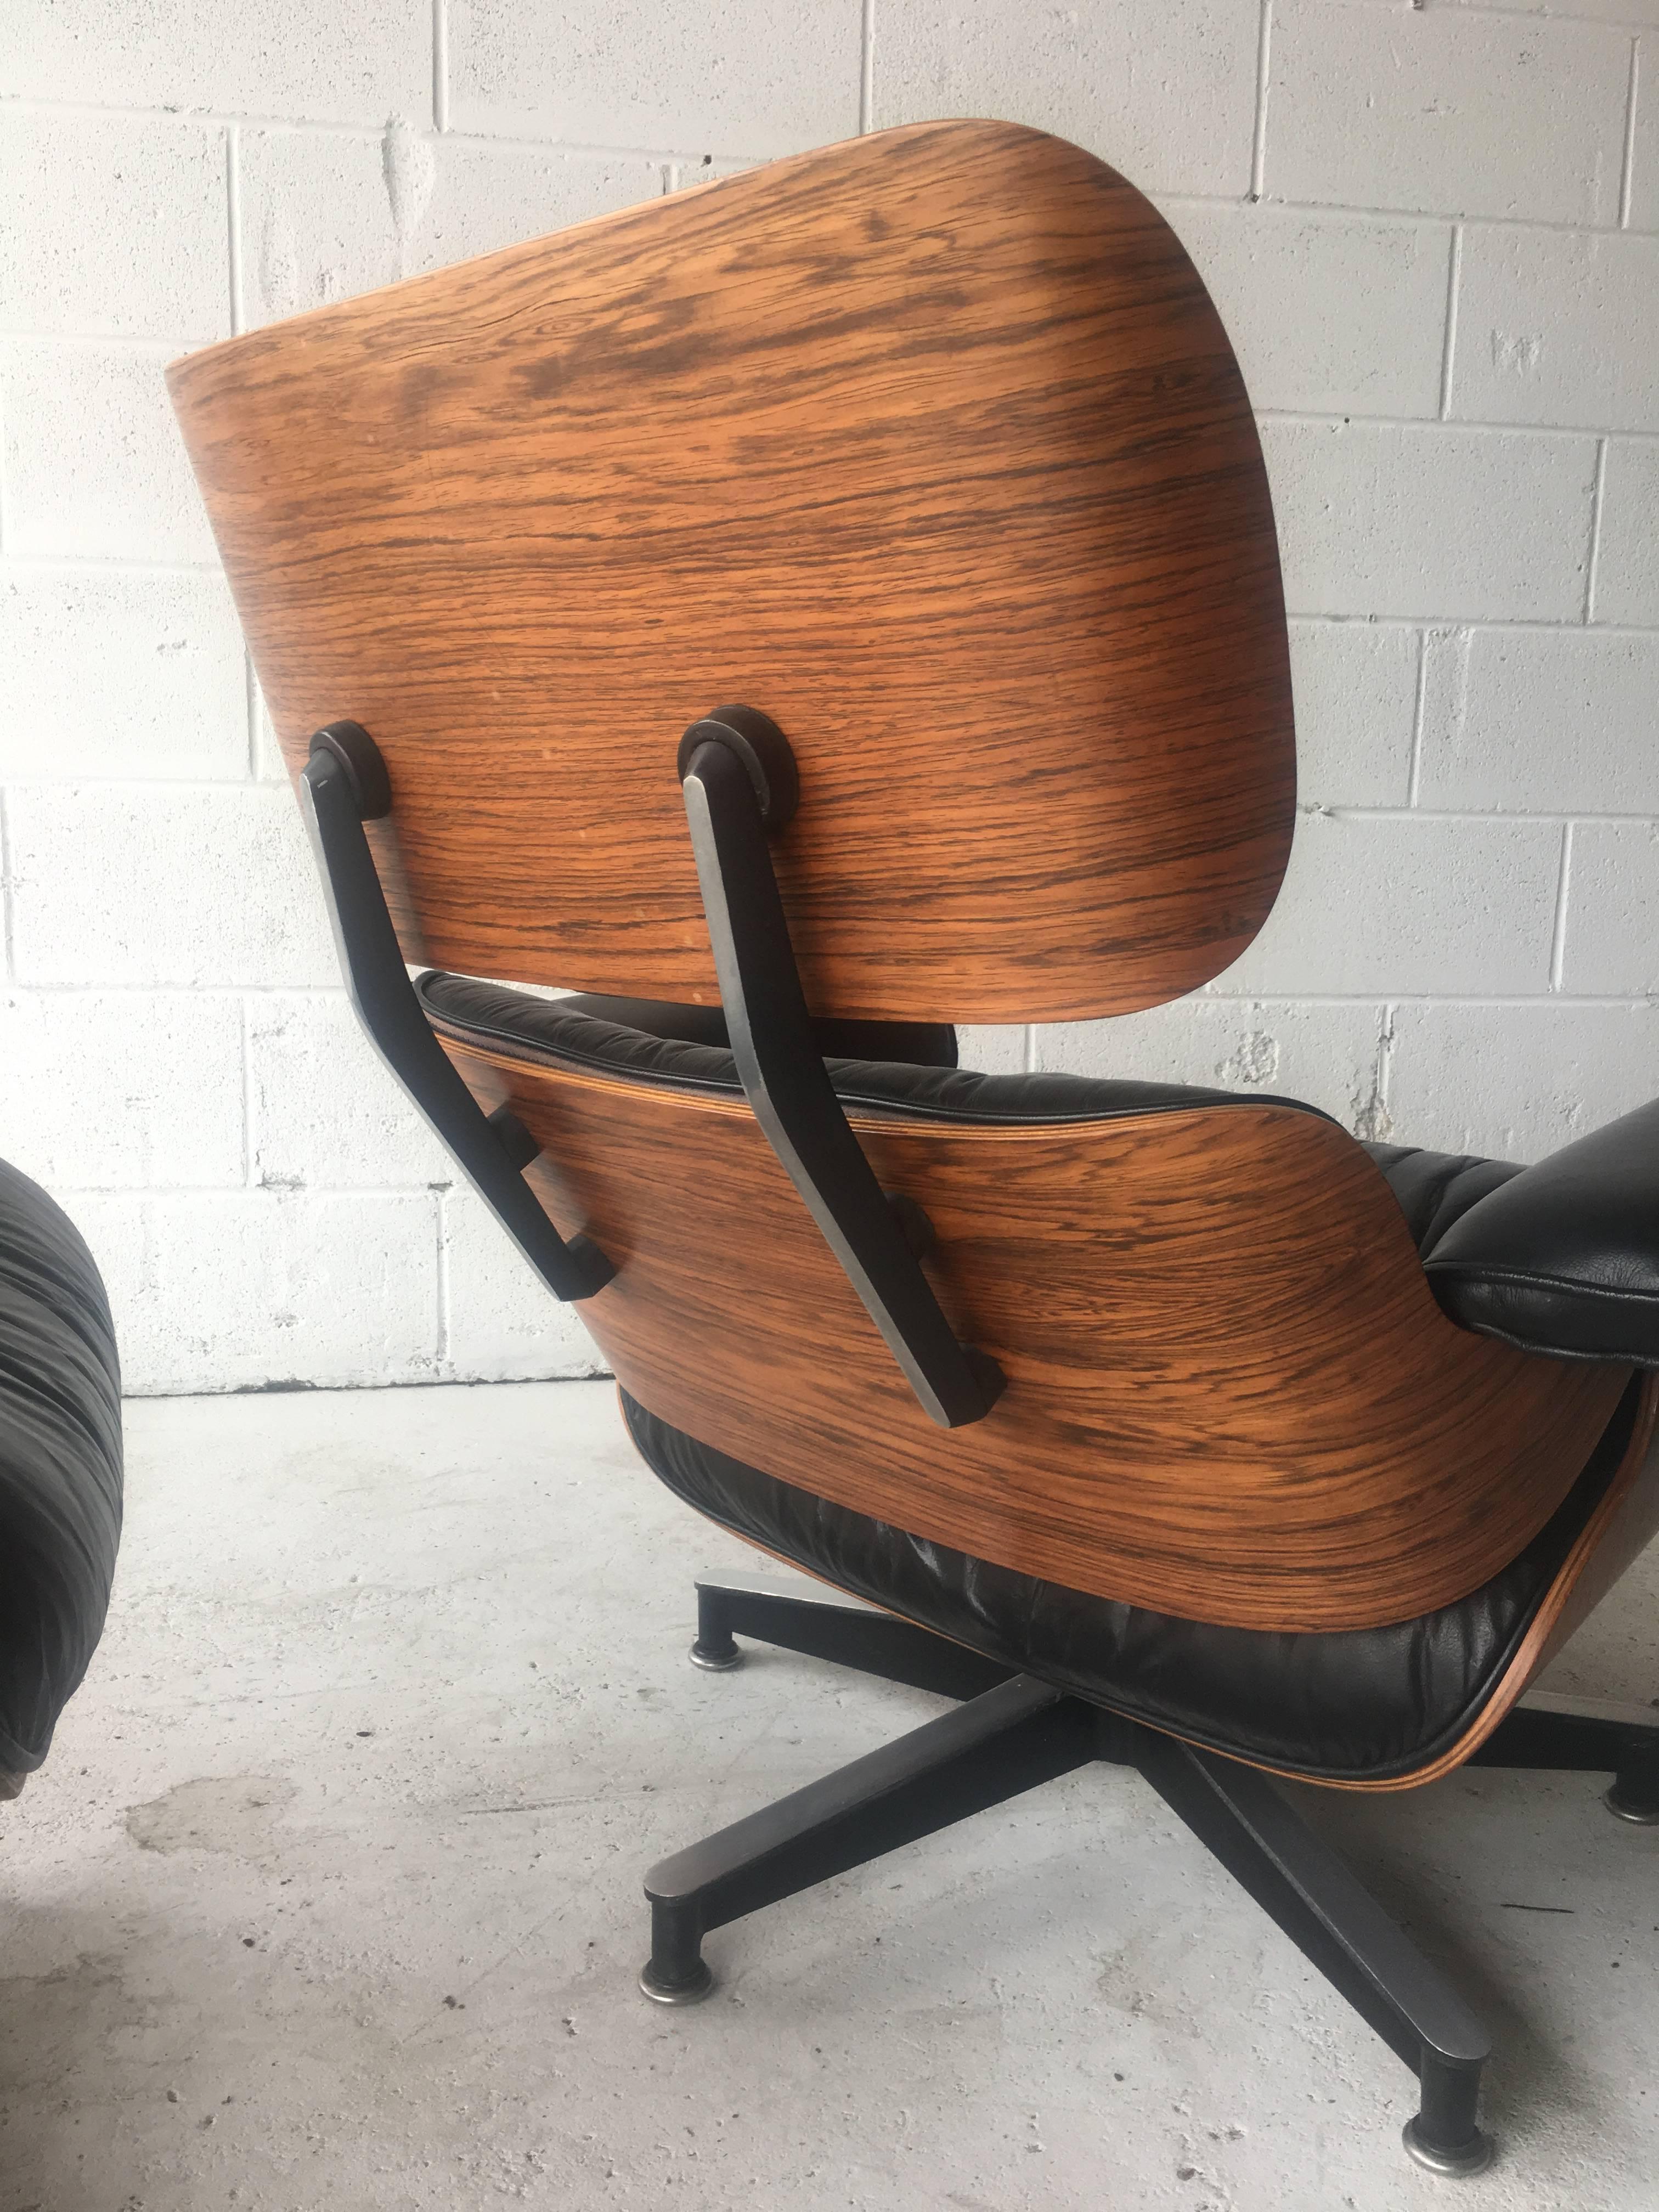 Herman Miller Eames lounge and ottoman in black leather. All original. Very good condition, early 1970s set. No tears to leather. Signed. Ships disassembled.